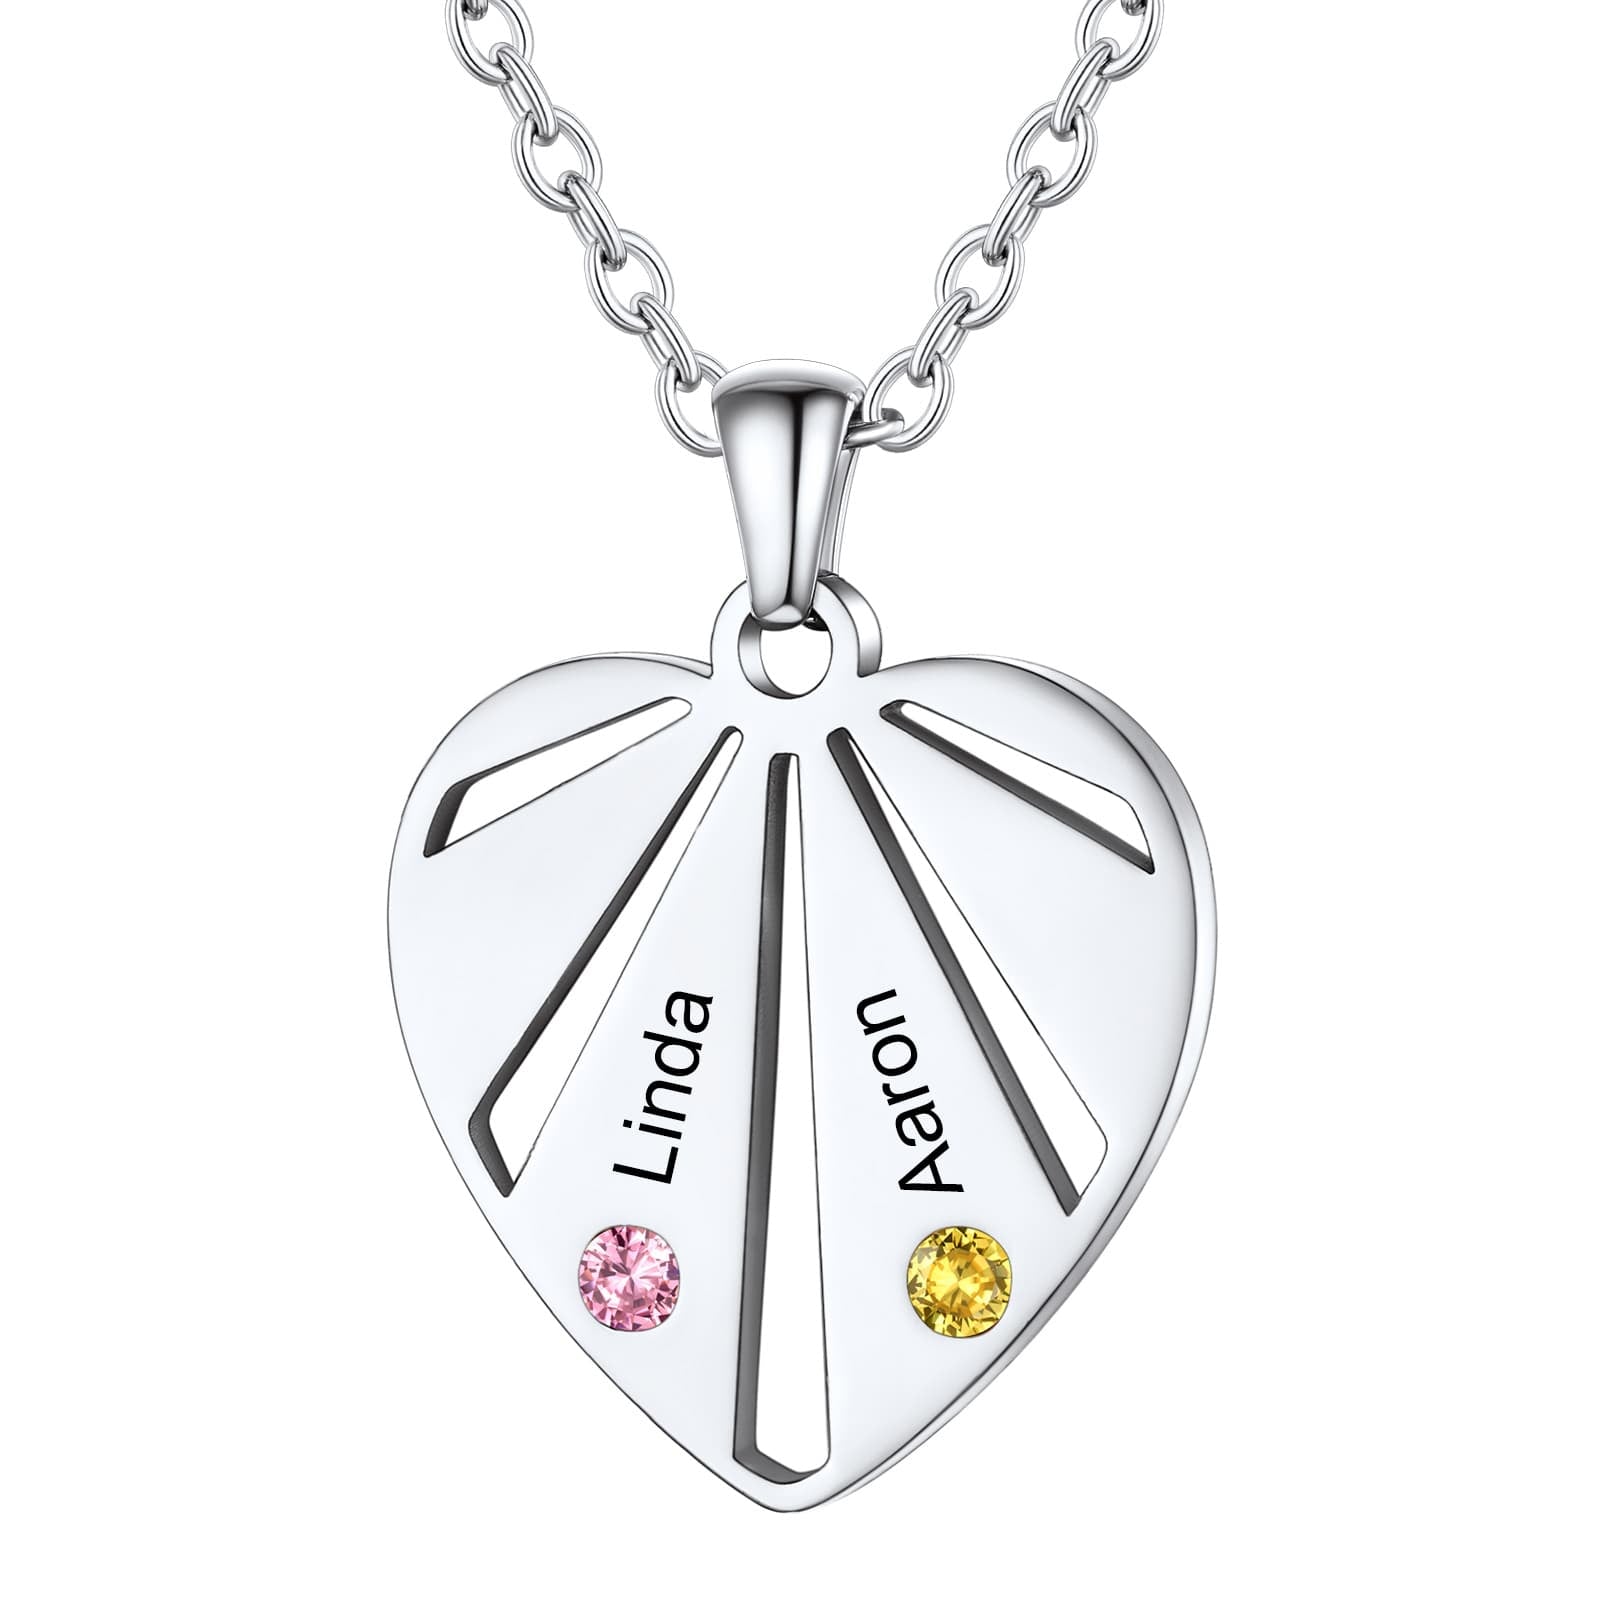 Personalized Engraved Heart Birthstone Necklace 2 stones silver